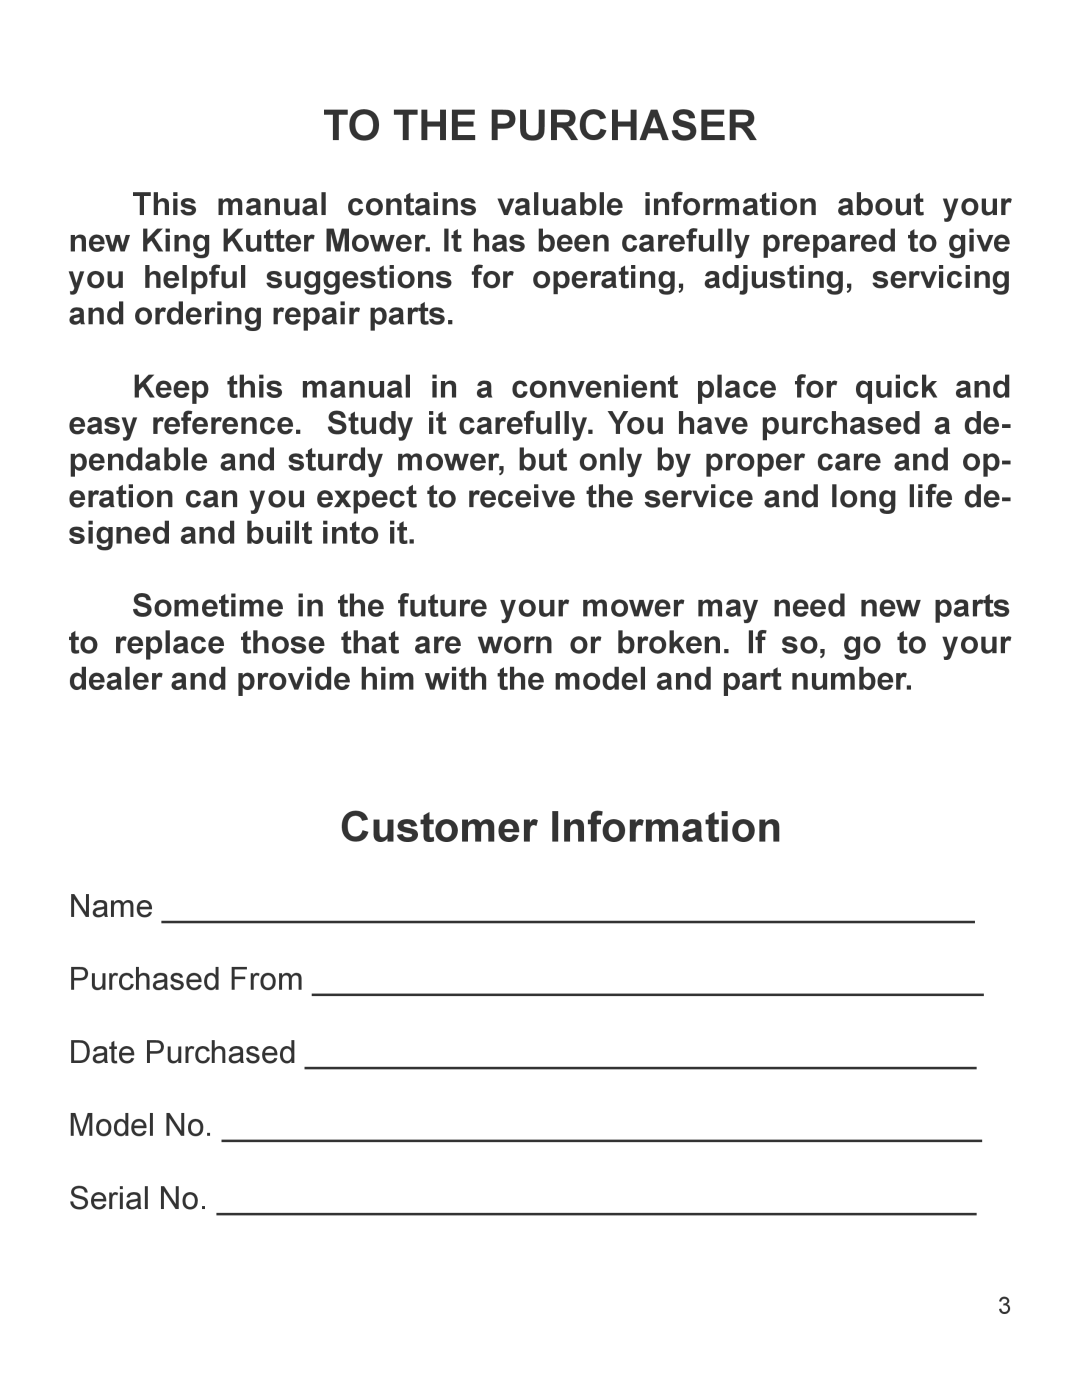 King Kutter Part No 999993 manual To The Purchaser, Customer Information 